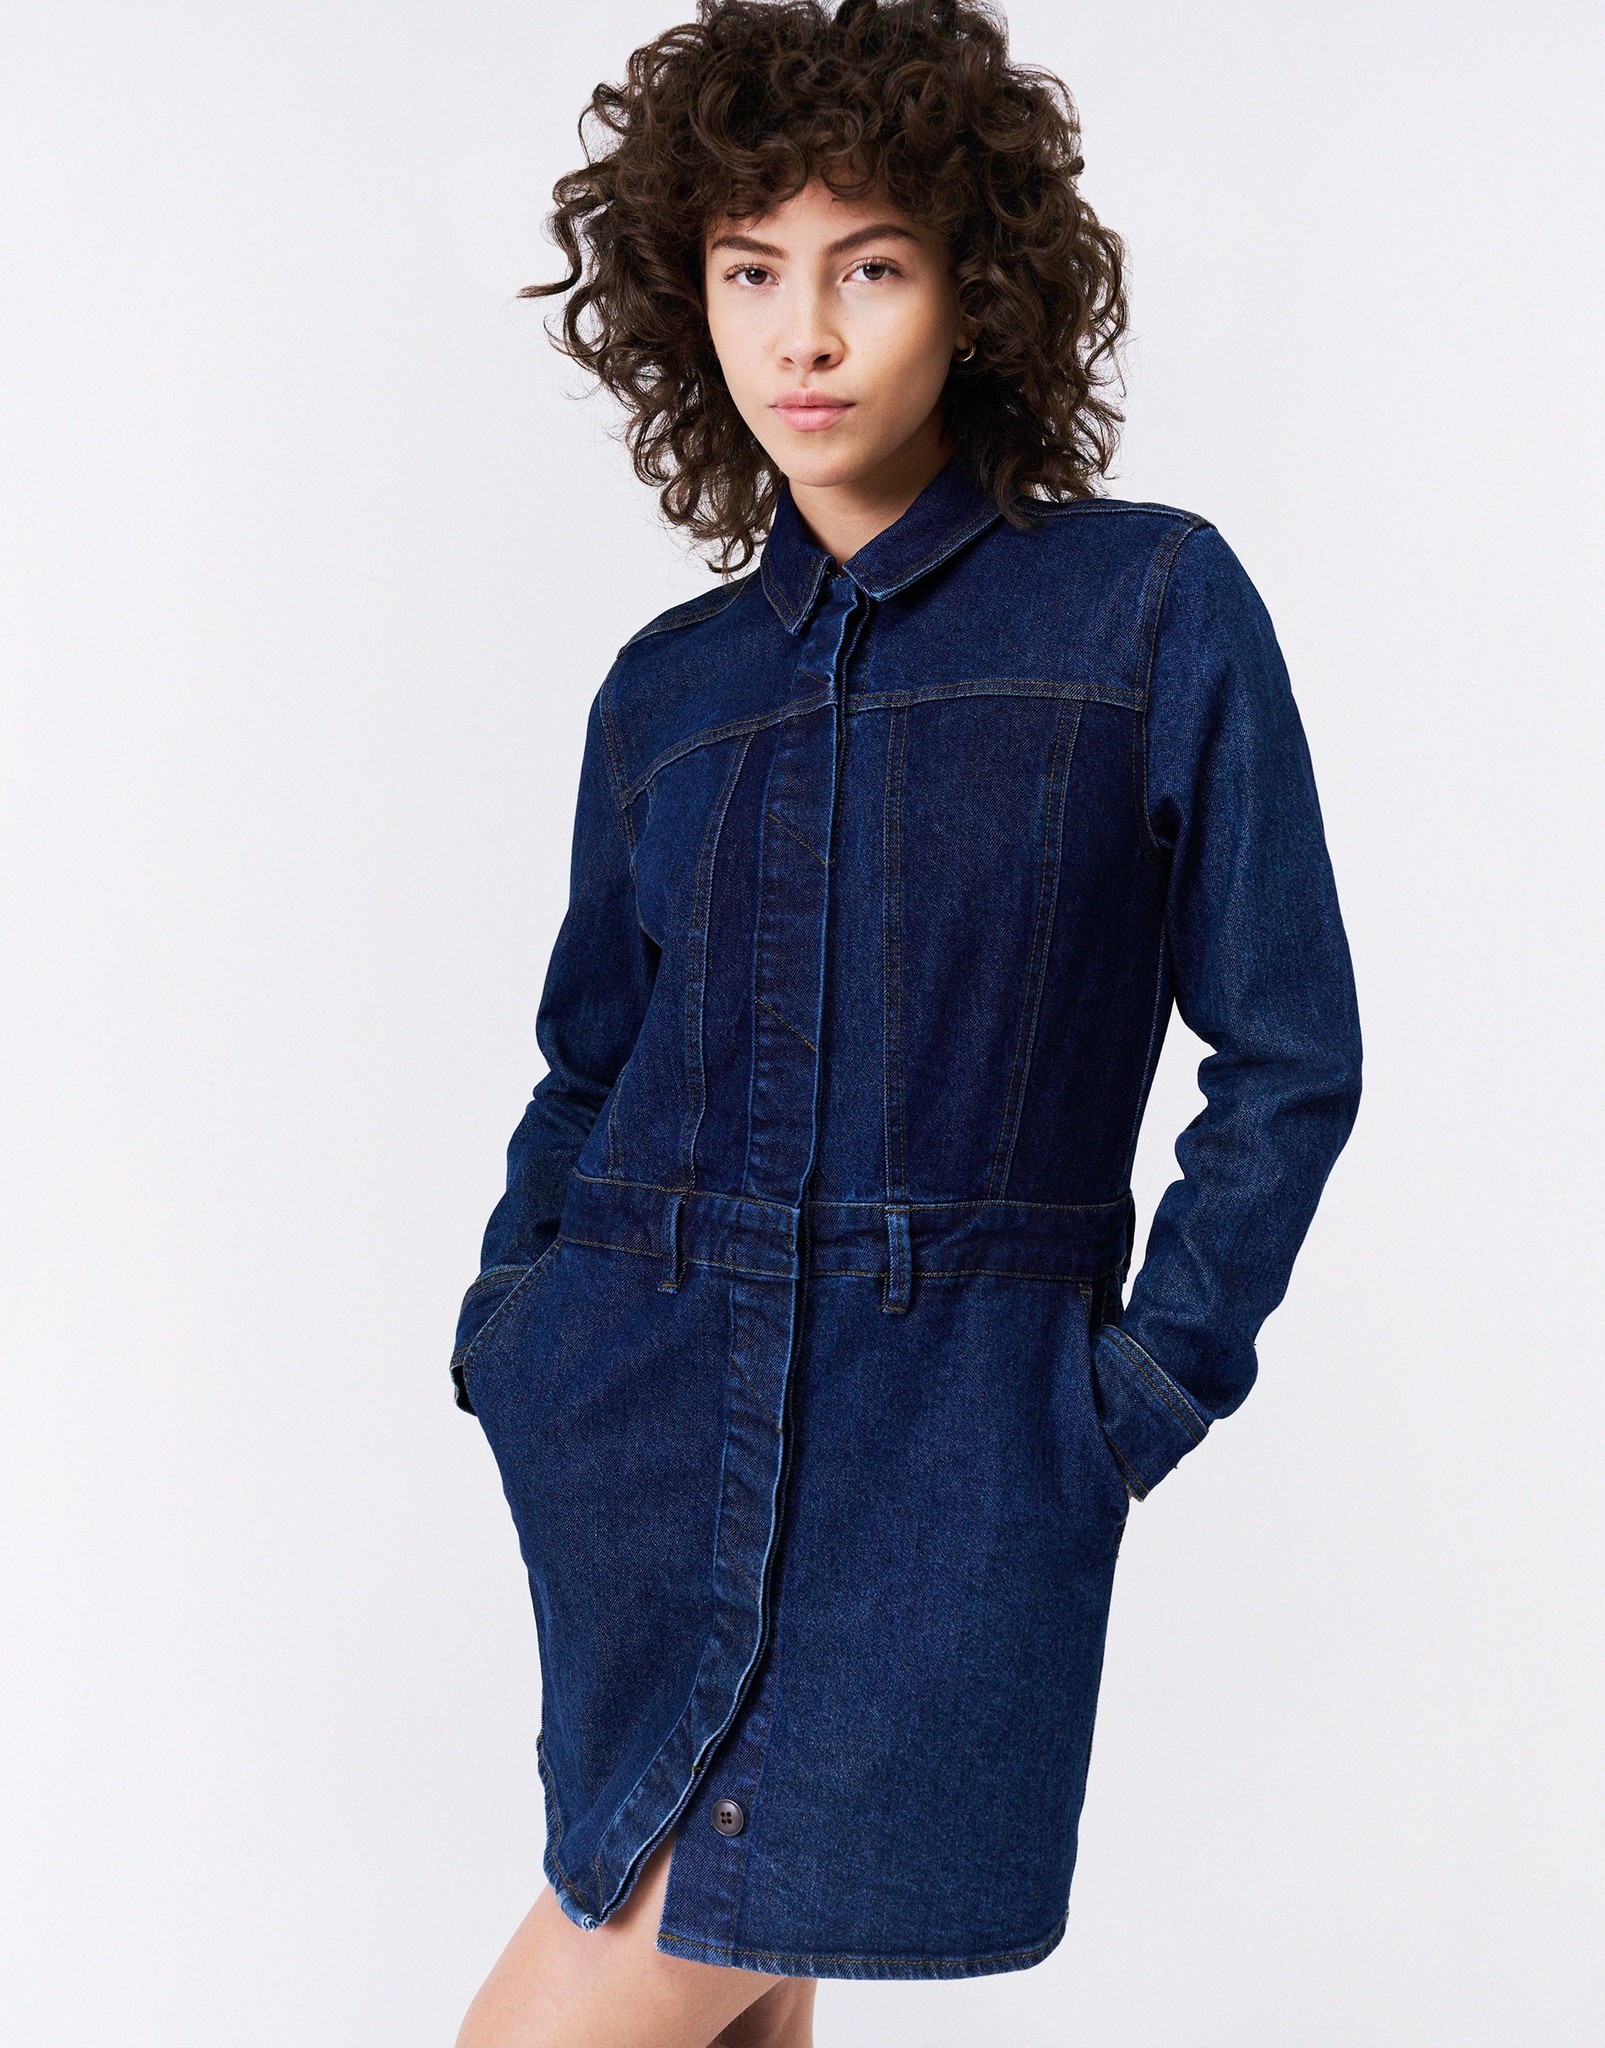 Unpublished Penny Convertible Denim Dress Jacket in Classic